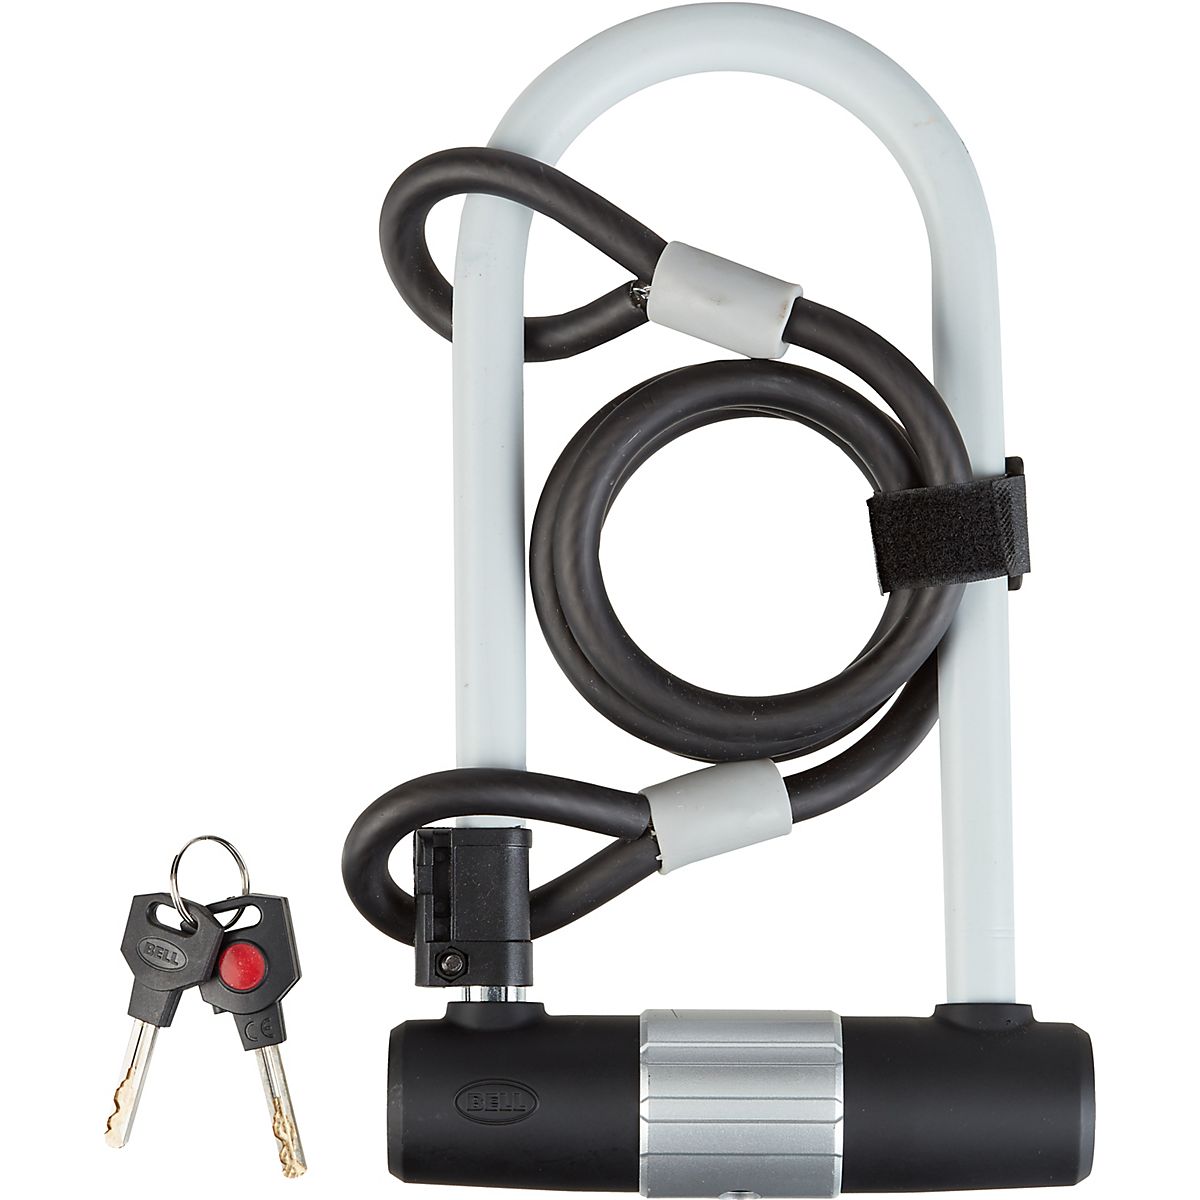 Bell Catalyst 550 Bicycle Lock | Free Shipping at Academy